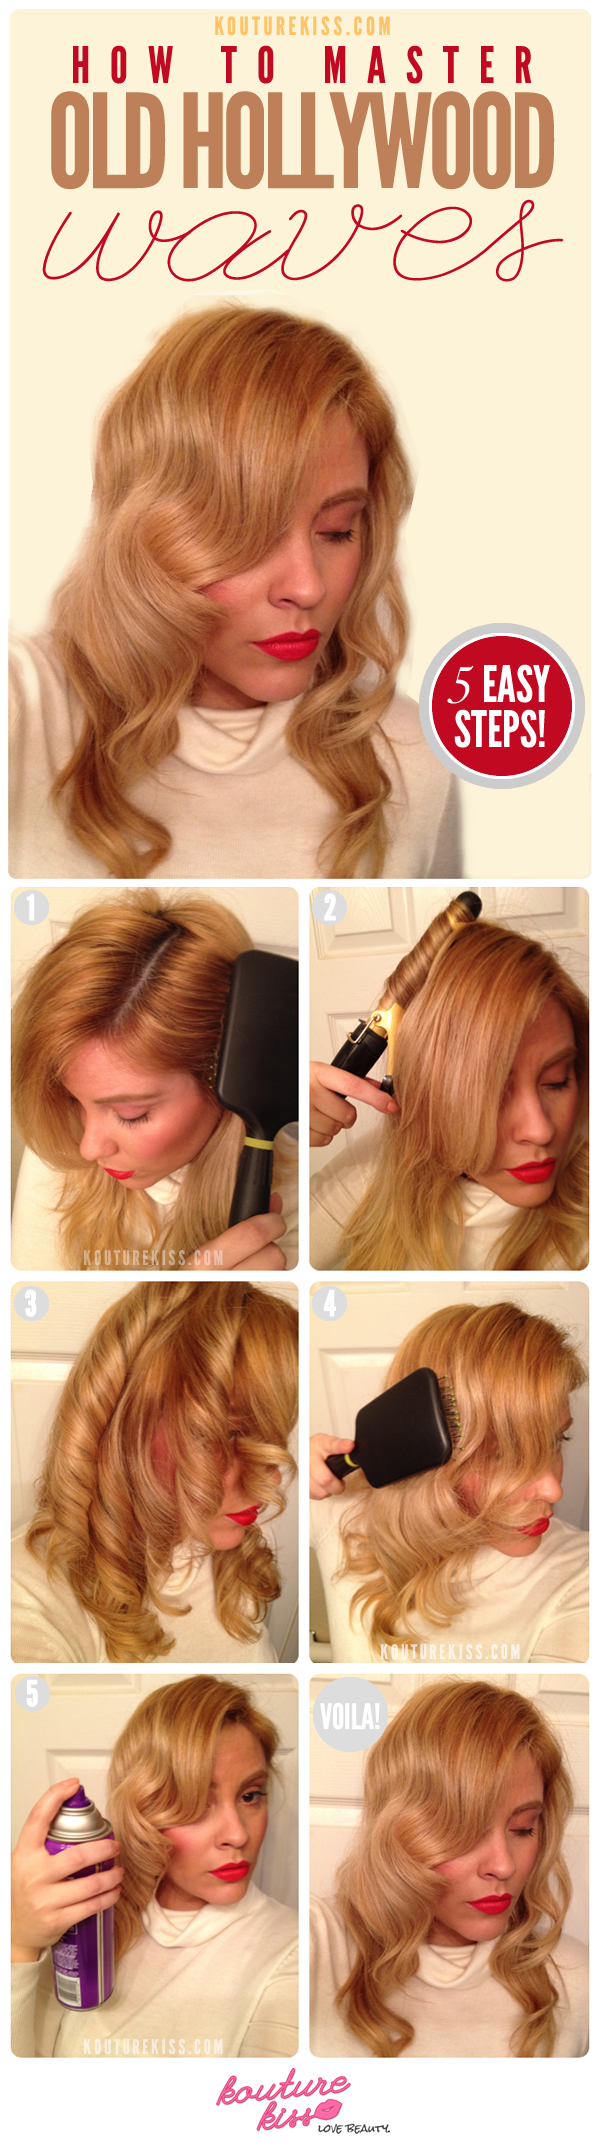 DIY Old Hollywood Waves Hairstyle Over